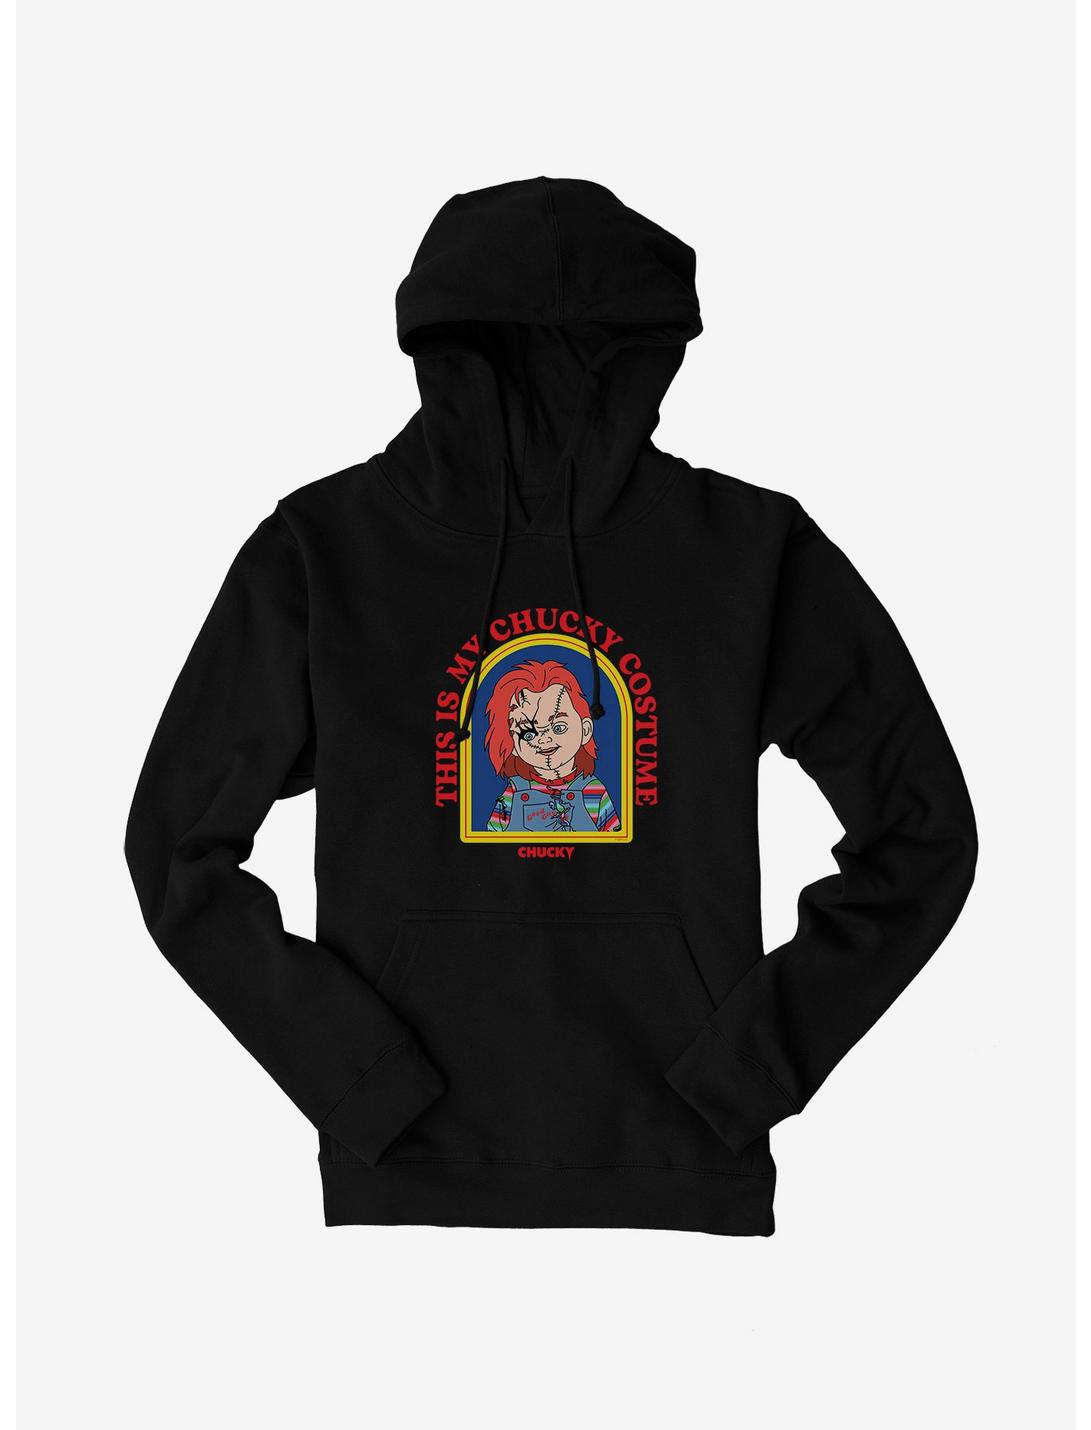 Chucky This Is My Chucky Costume Hoodie, BLACK, hi-res